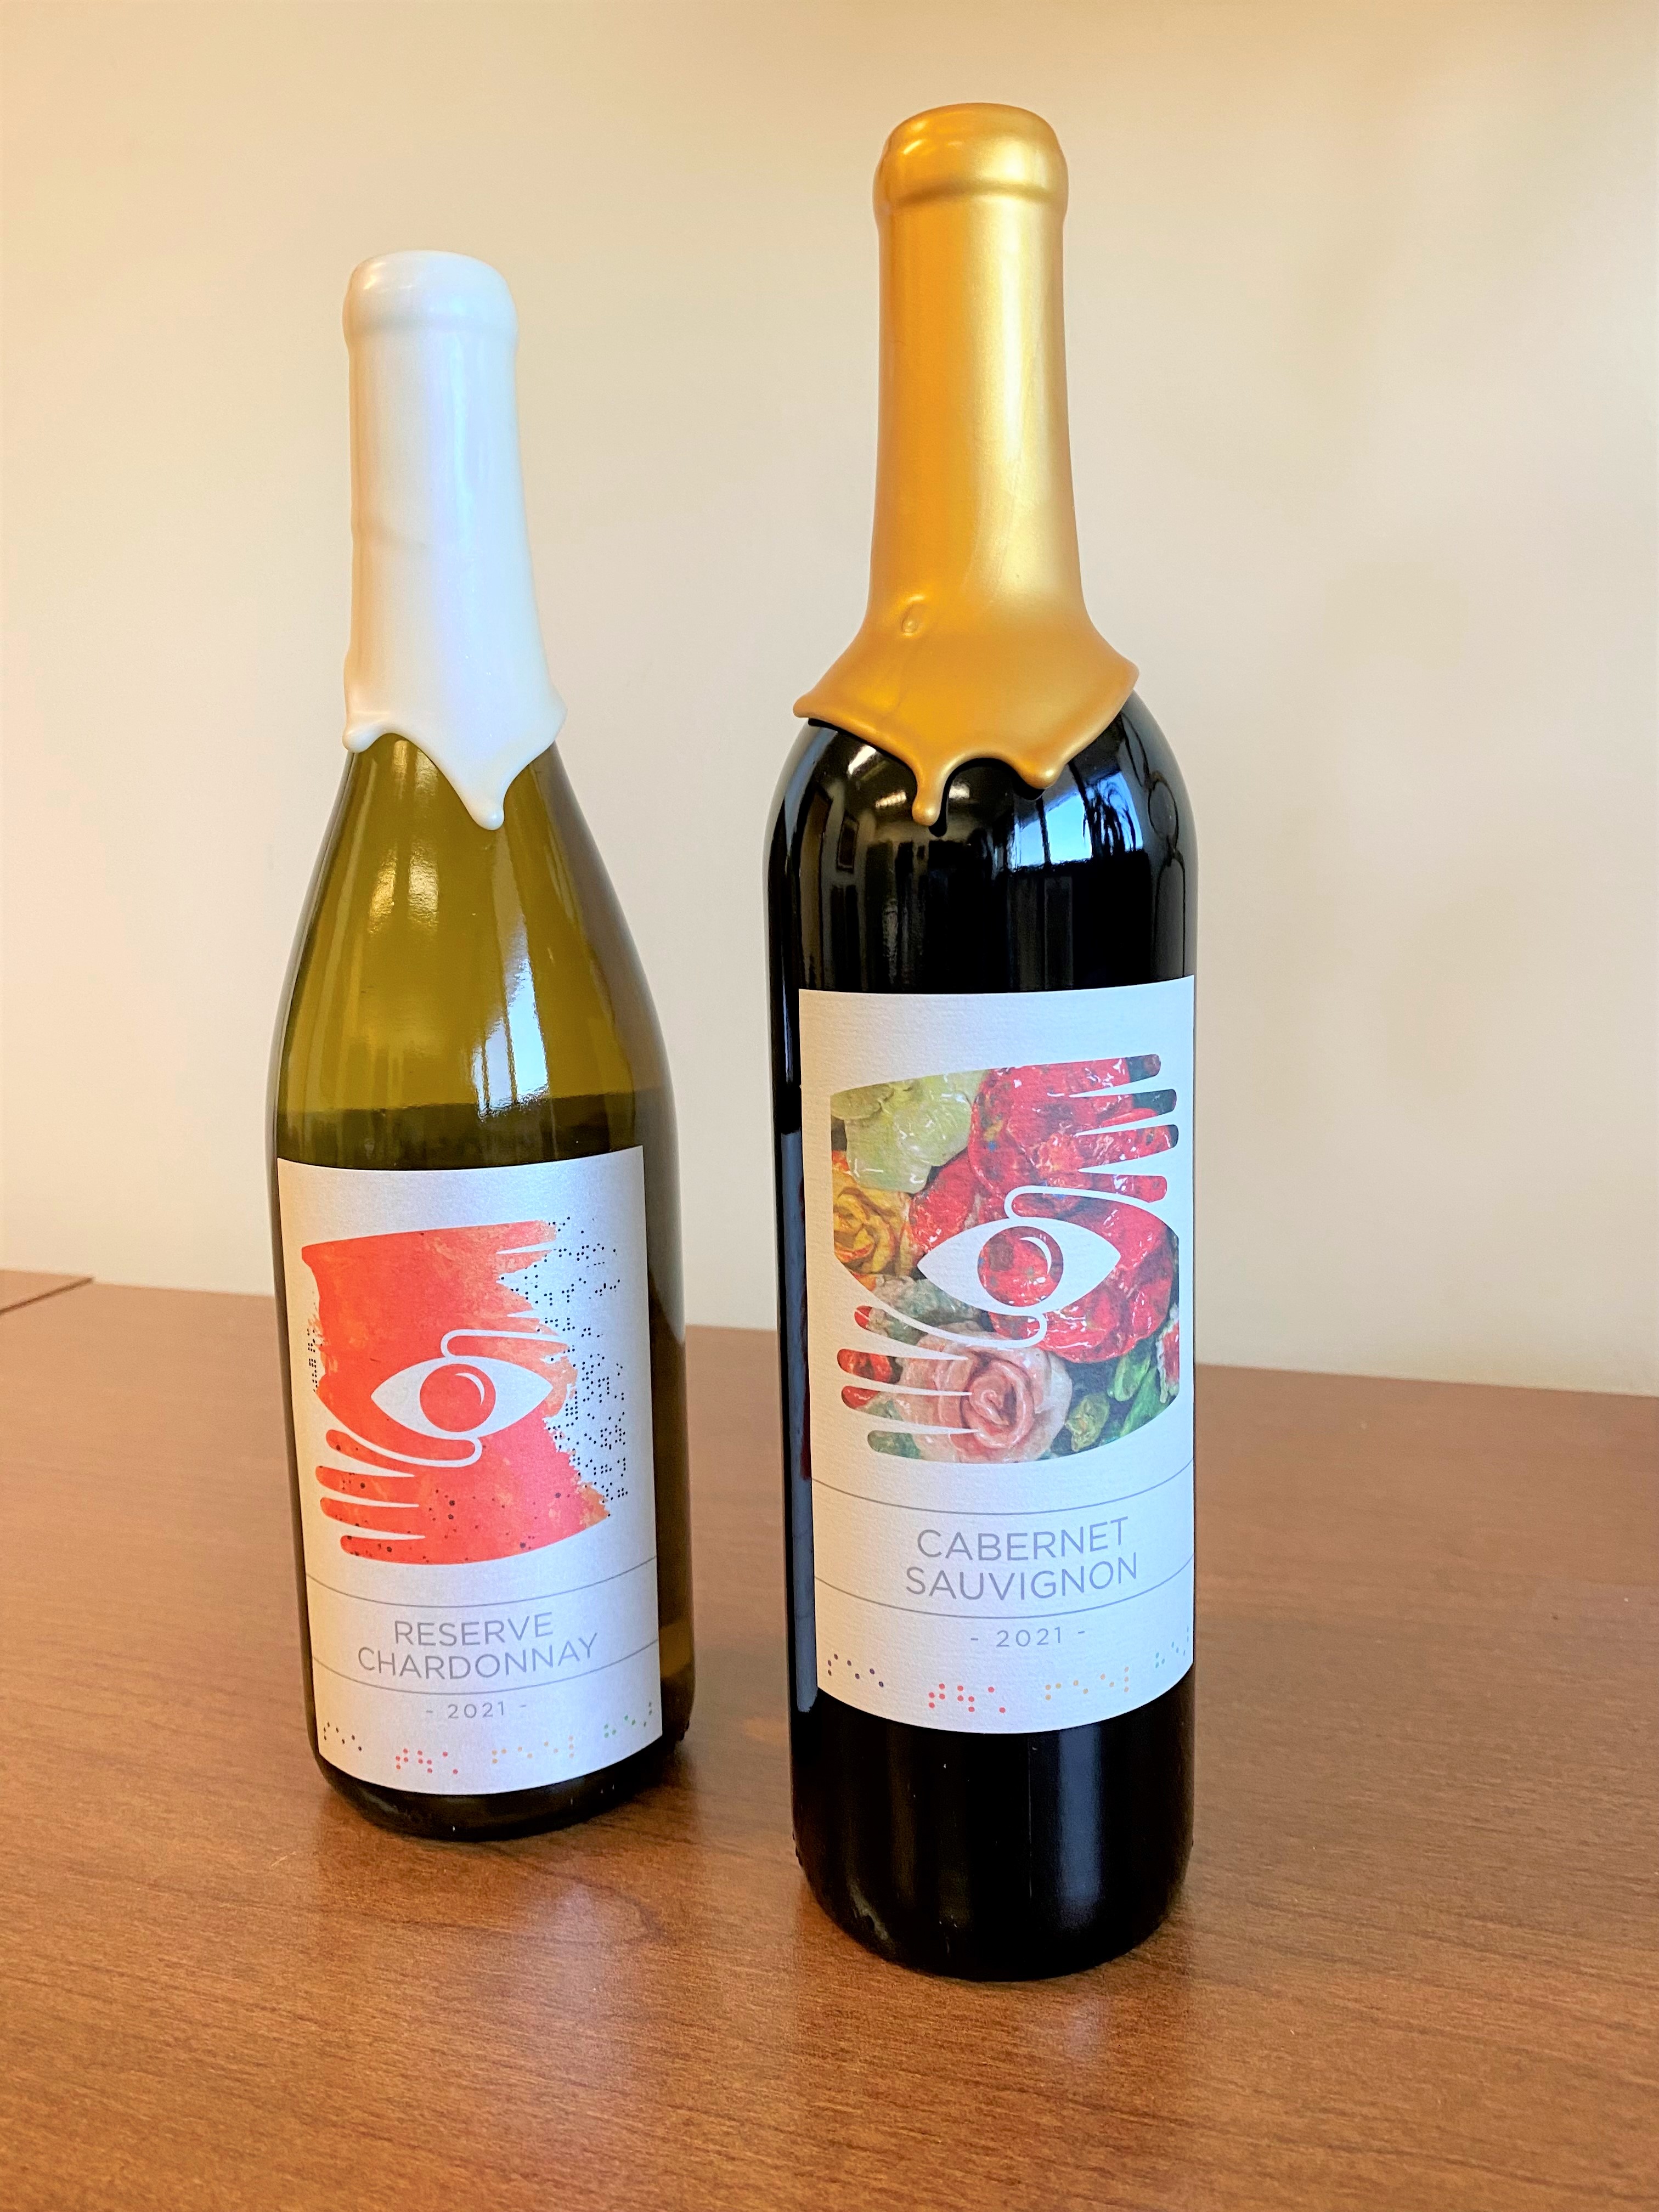 Two wine bottles with custom wine labels featuring the hand and eye logo of Envision made out of artwork imagery from Envision Arts artists